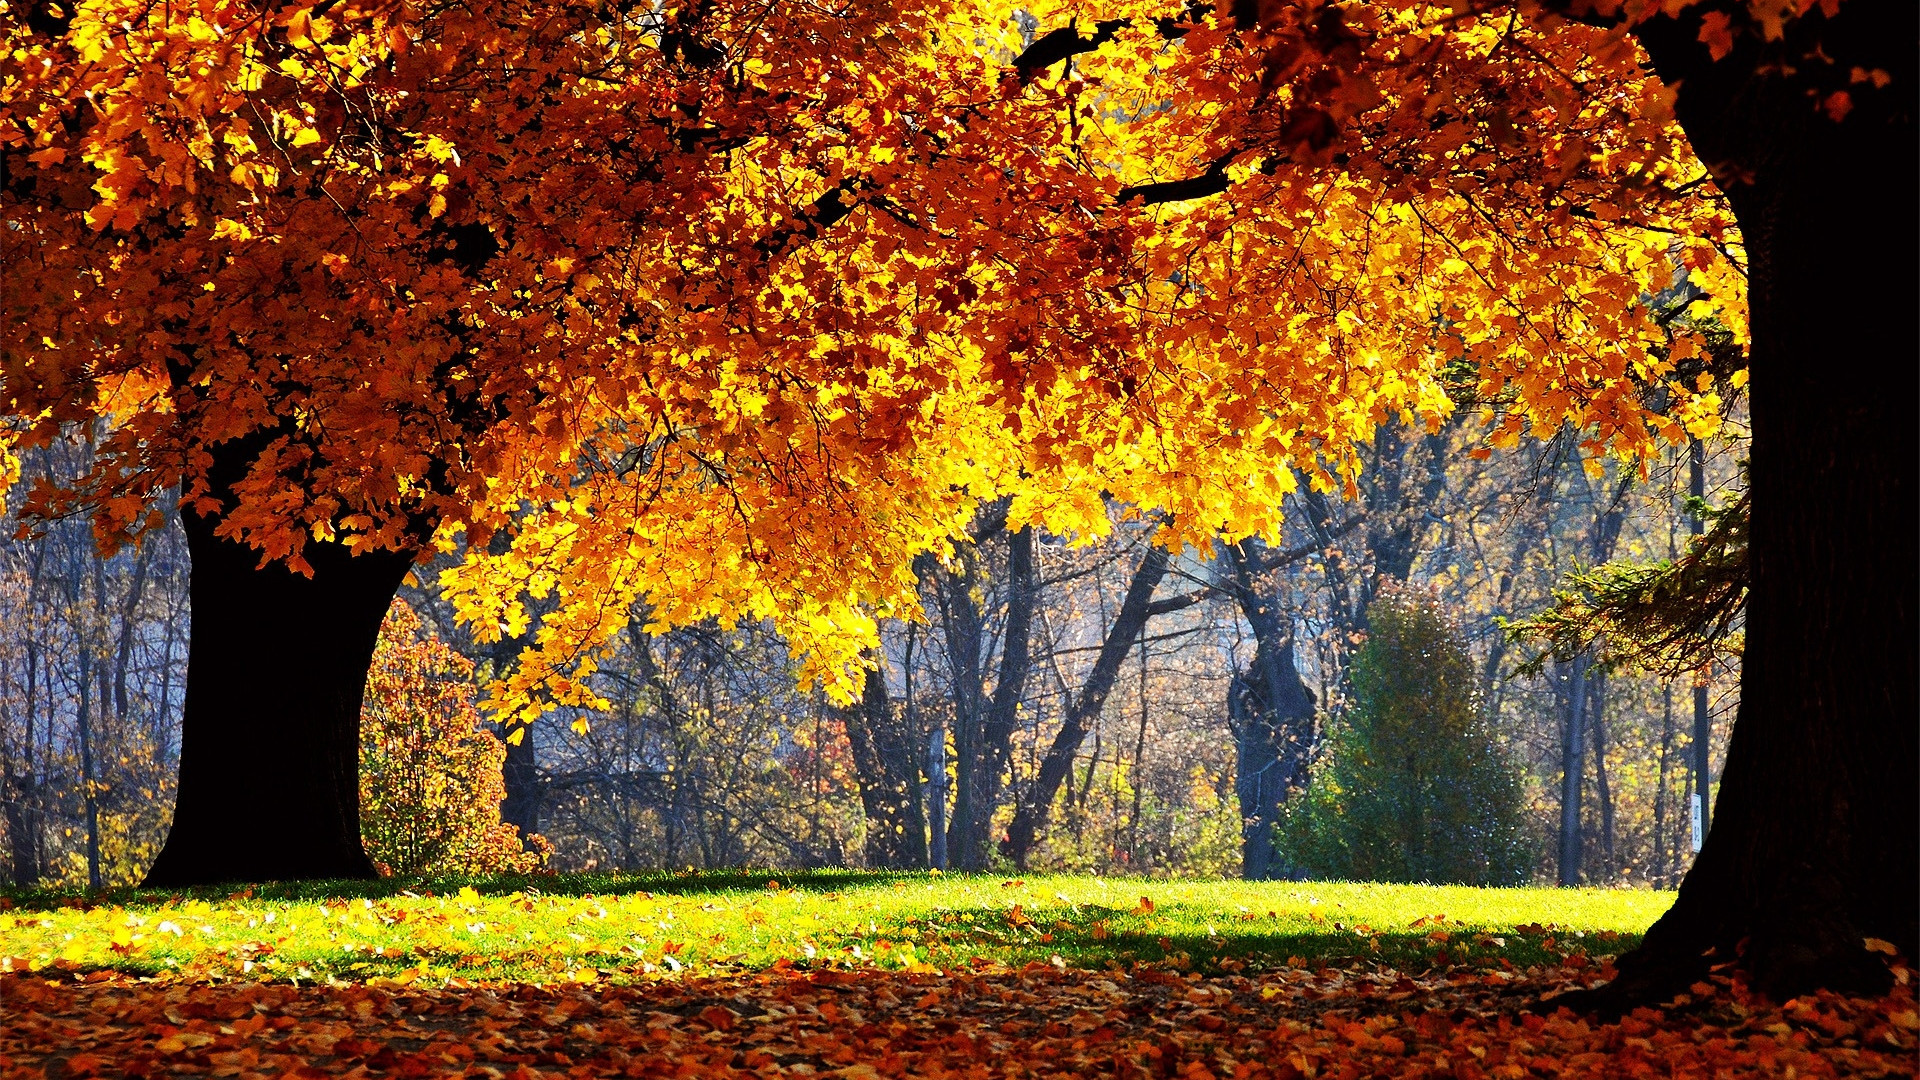 1920x1080 Full HD 1080p Autumn Wallpapers HD, Desktop Backgrounds , Images  and Pictures